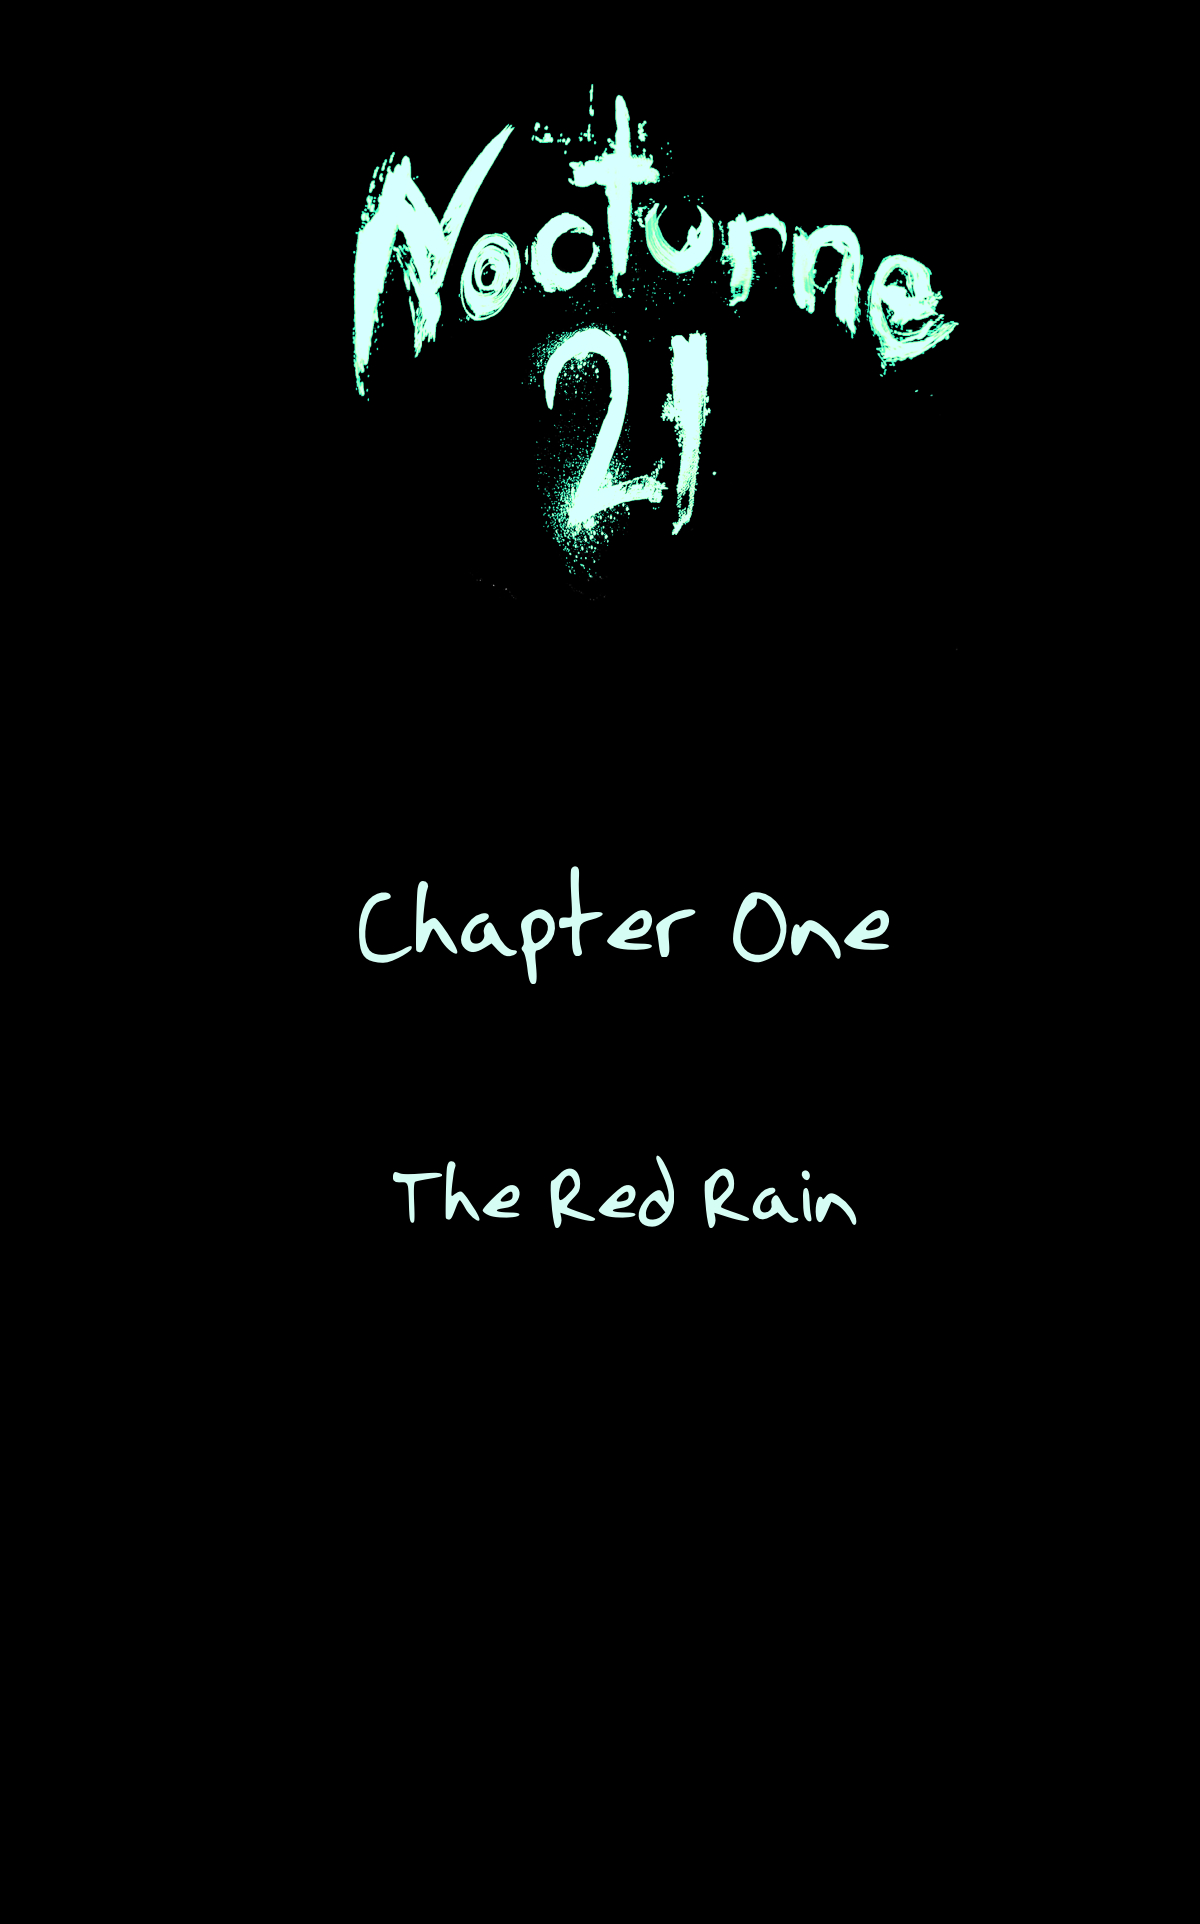 CHAPTER ONE: THE RED RAIN